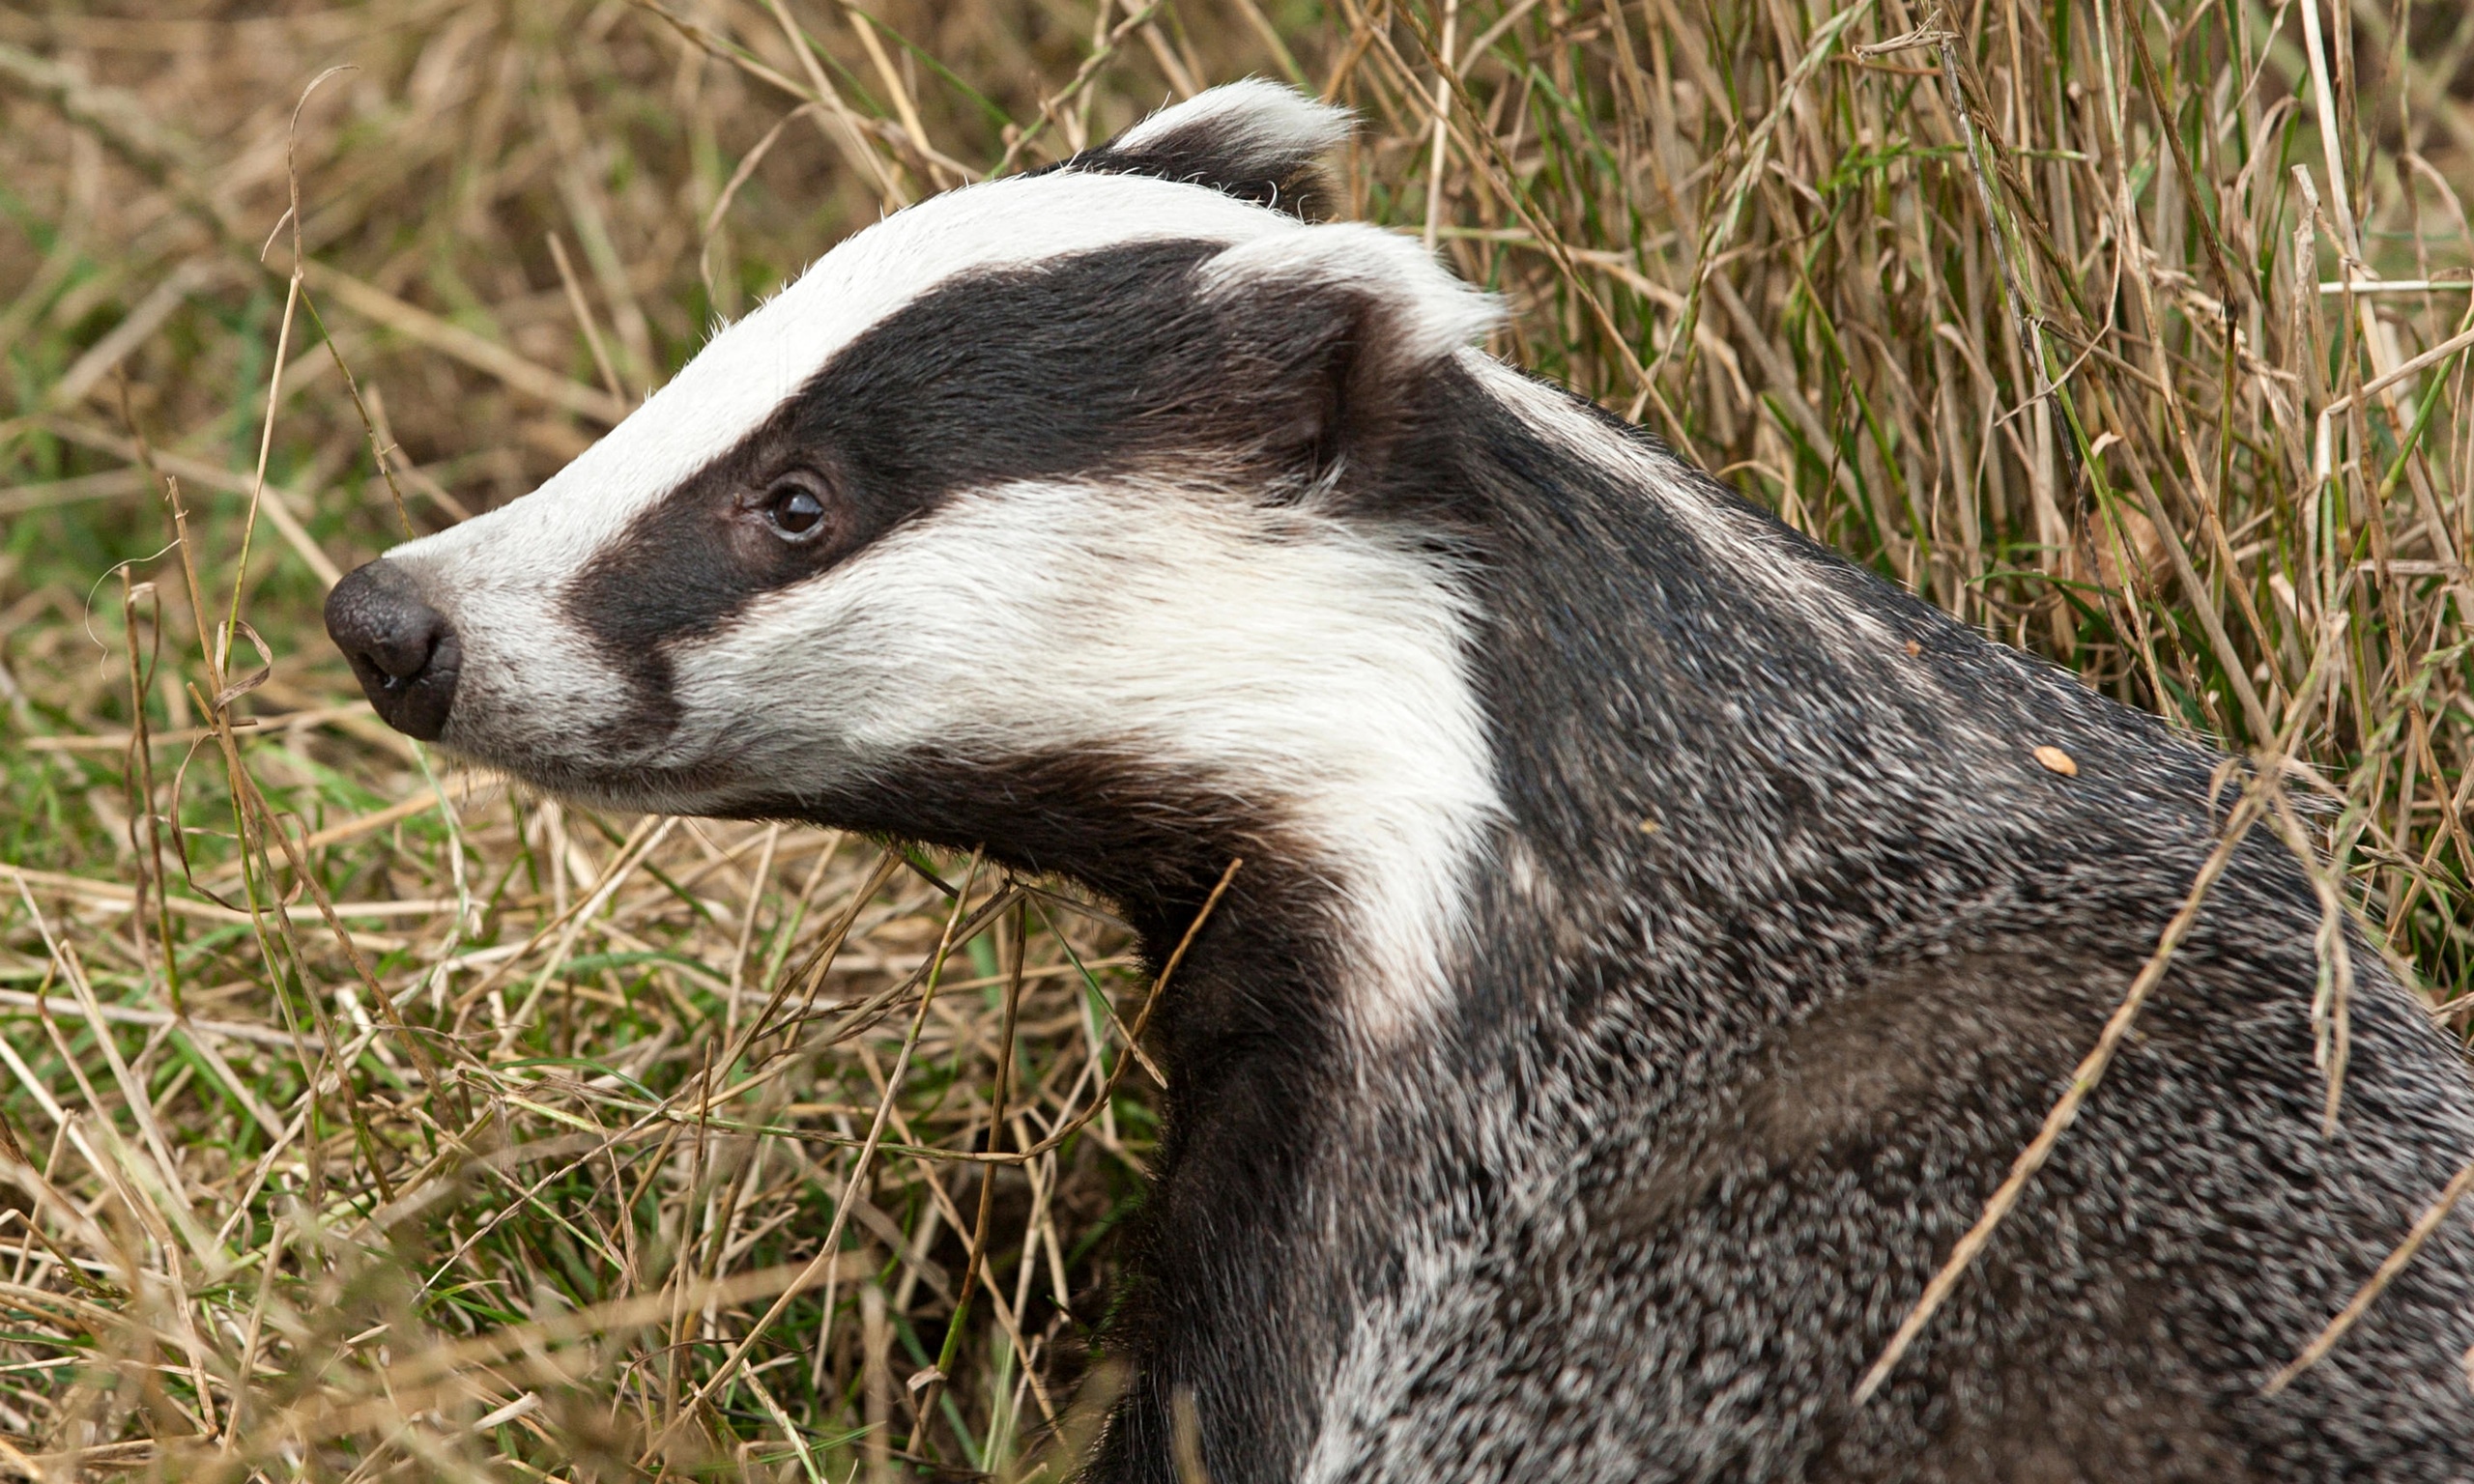 Secrets of a badger's toilet | Environment | The Guardian